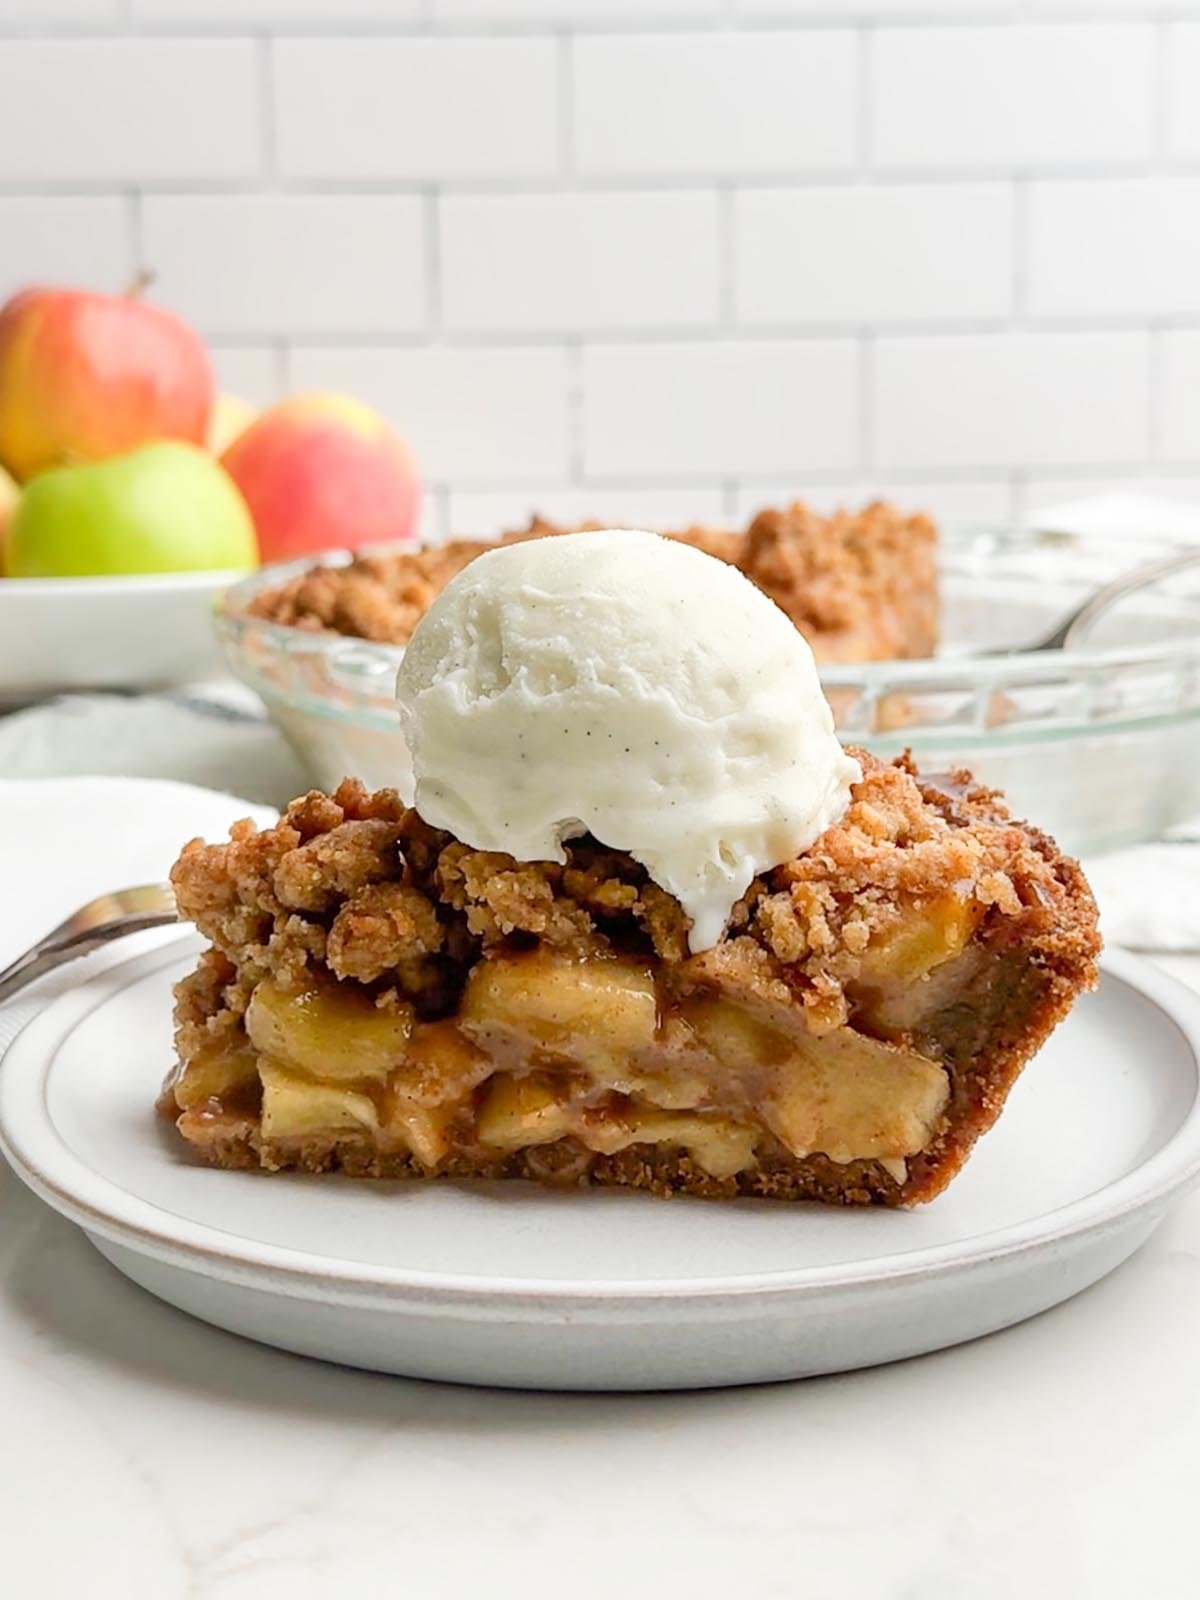 side view of apple pie with graham cracker crust topped with vanilla ice cream.